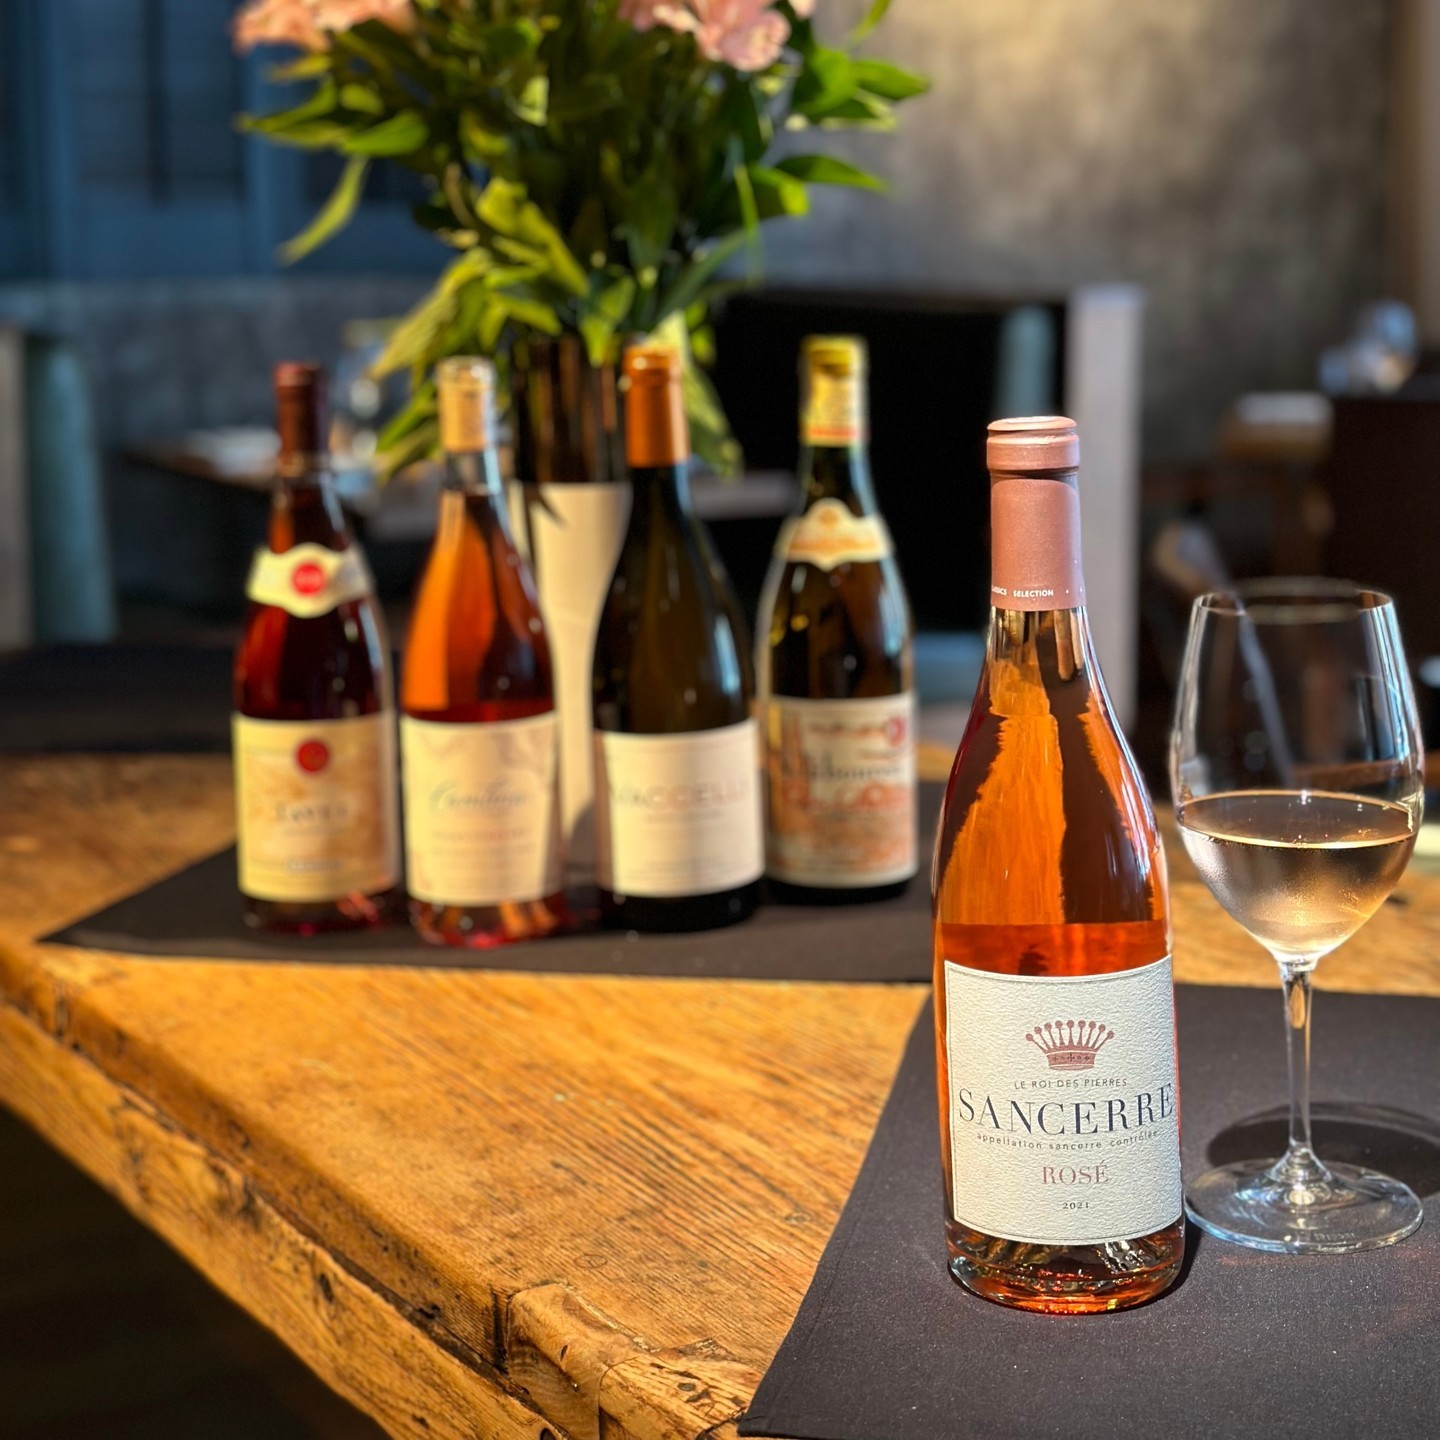 Here's something you maybe didn't know about Sancerre: When people think of Sancerre, they are usually thinking of Sauvignon Blanc and the crisp minerality it displays when grown in the Sancerre soil. ⁠
⁠
Did you also know that Sancerre produces beautiful nuanced Pinot Noir (and therefore Rose)?⁠
⁠
Case in point the 2021 Rose of Pinot Noir, Roi Des Pierres, is light and bright, all while bringing a greater depth for rose that can often be missing. This wine will certainly pair well with seafood focused dishes and lighter proteins. ⁠
⁠
Full wine list and reservations in bio!⁠